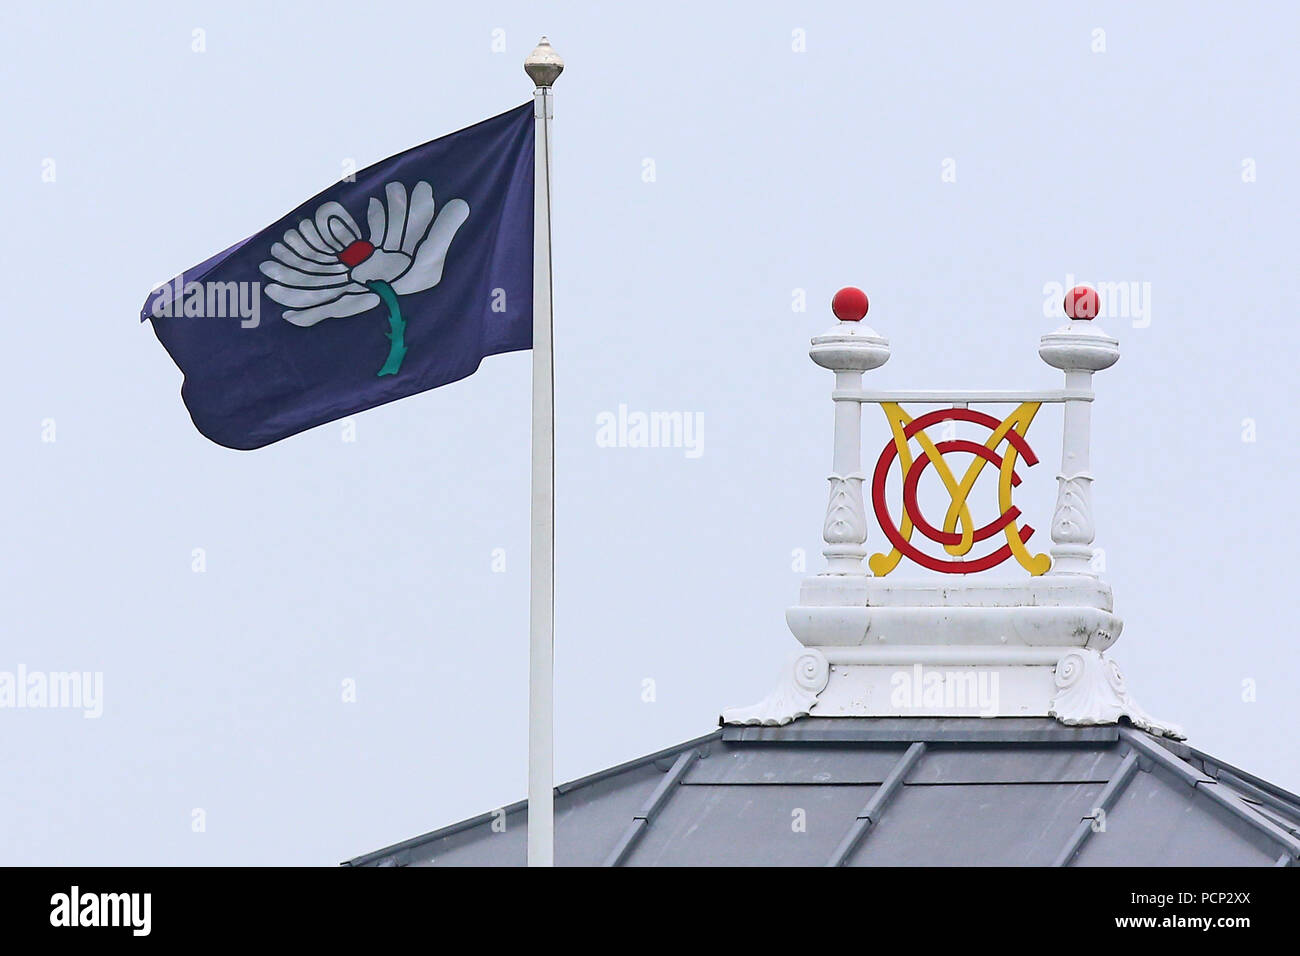 The Yorkshire flag flies next to the MCC crest during Middlesex CCC vs Yorkshire CCC, Specsavers County Championship Division 1 Cricket at Lords Cric Stock Photo